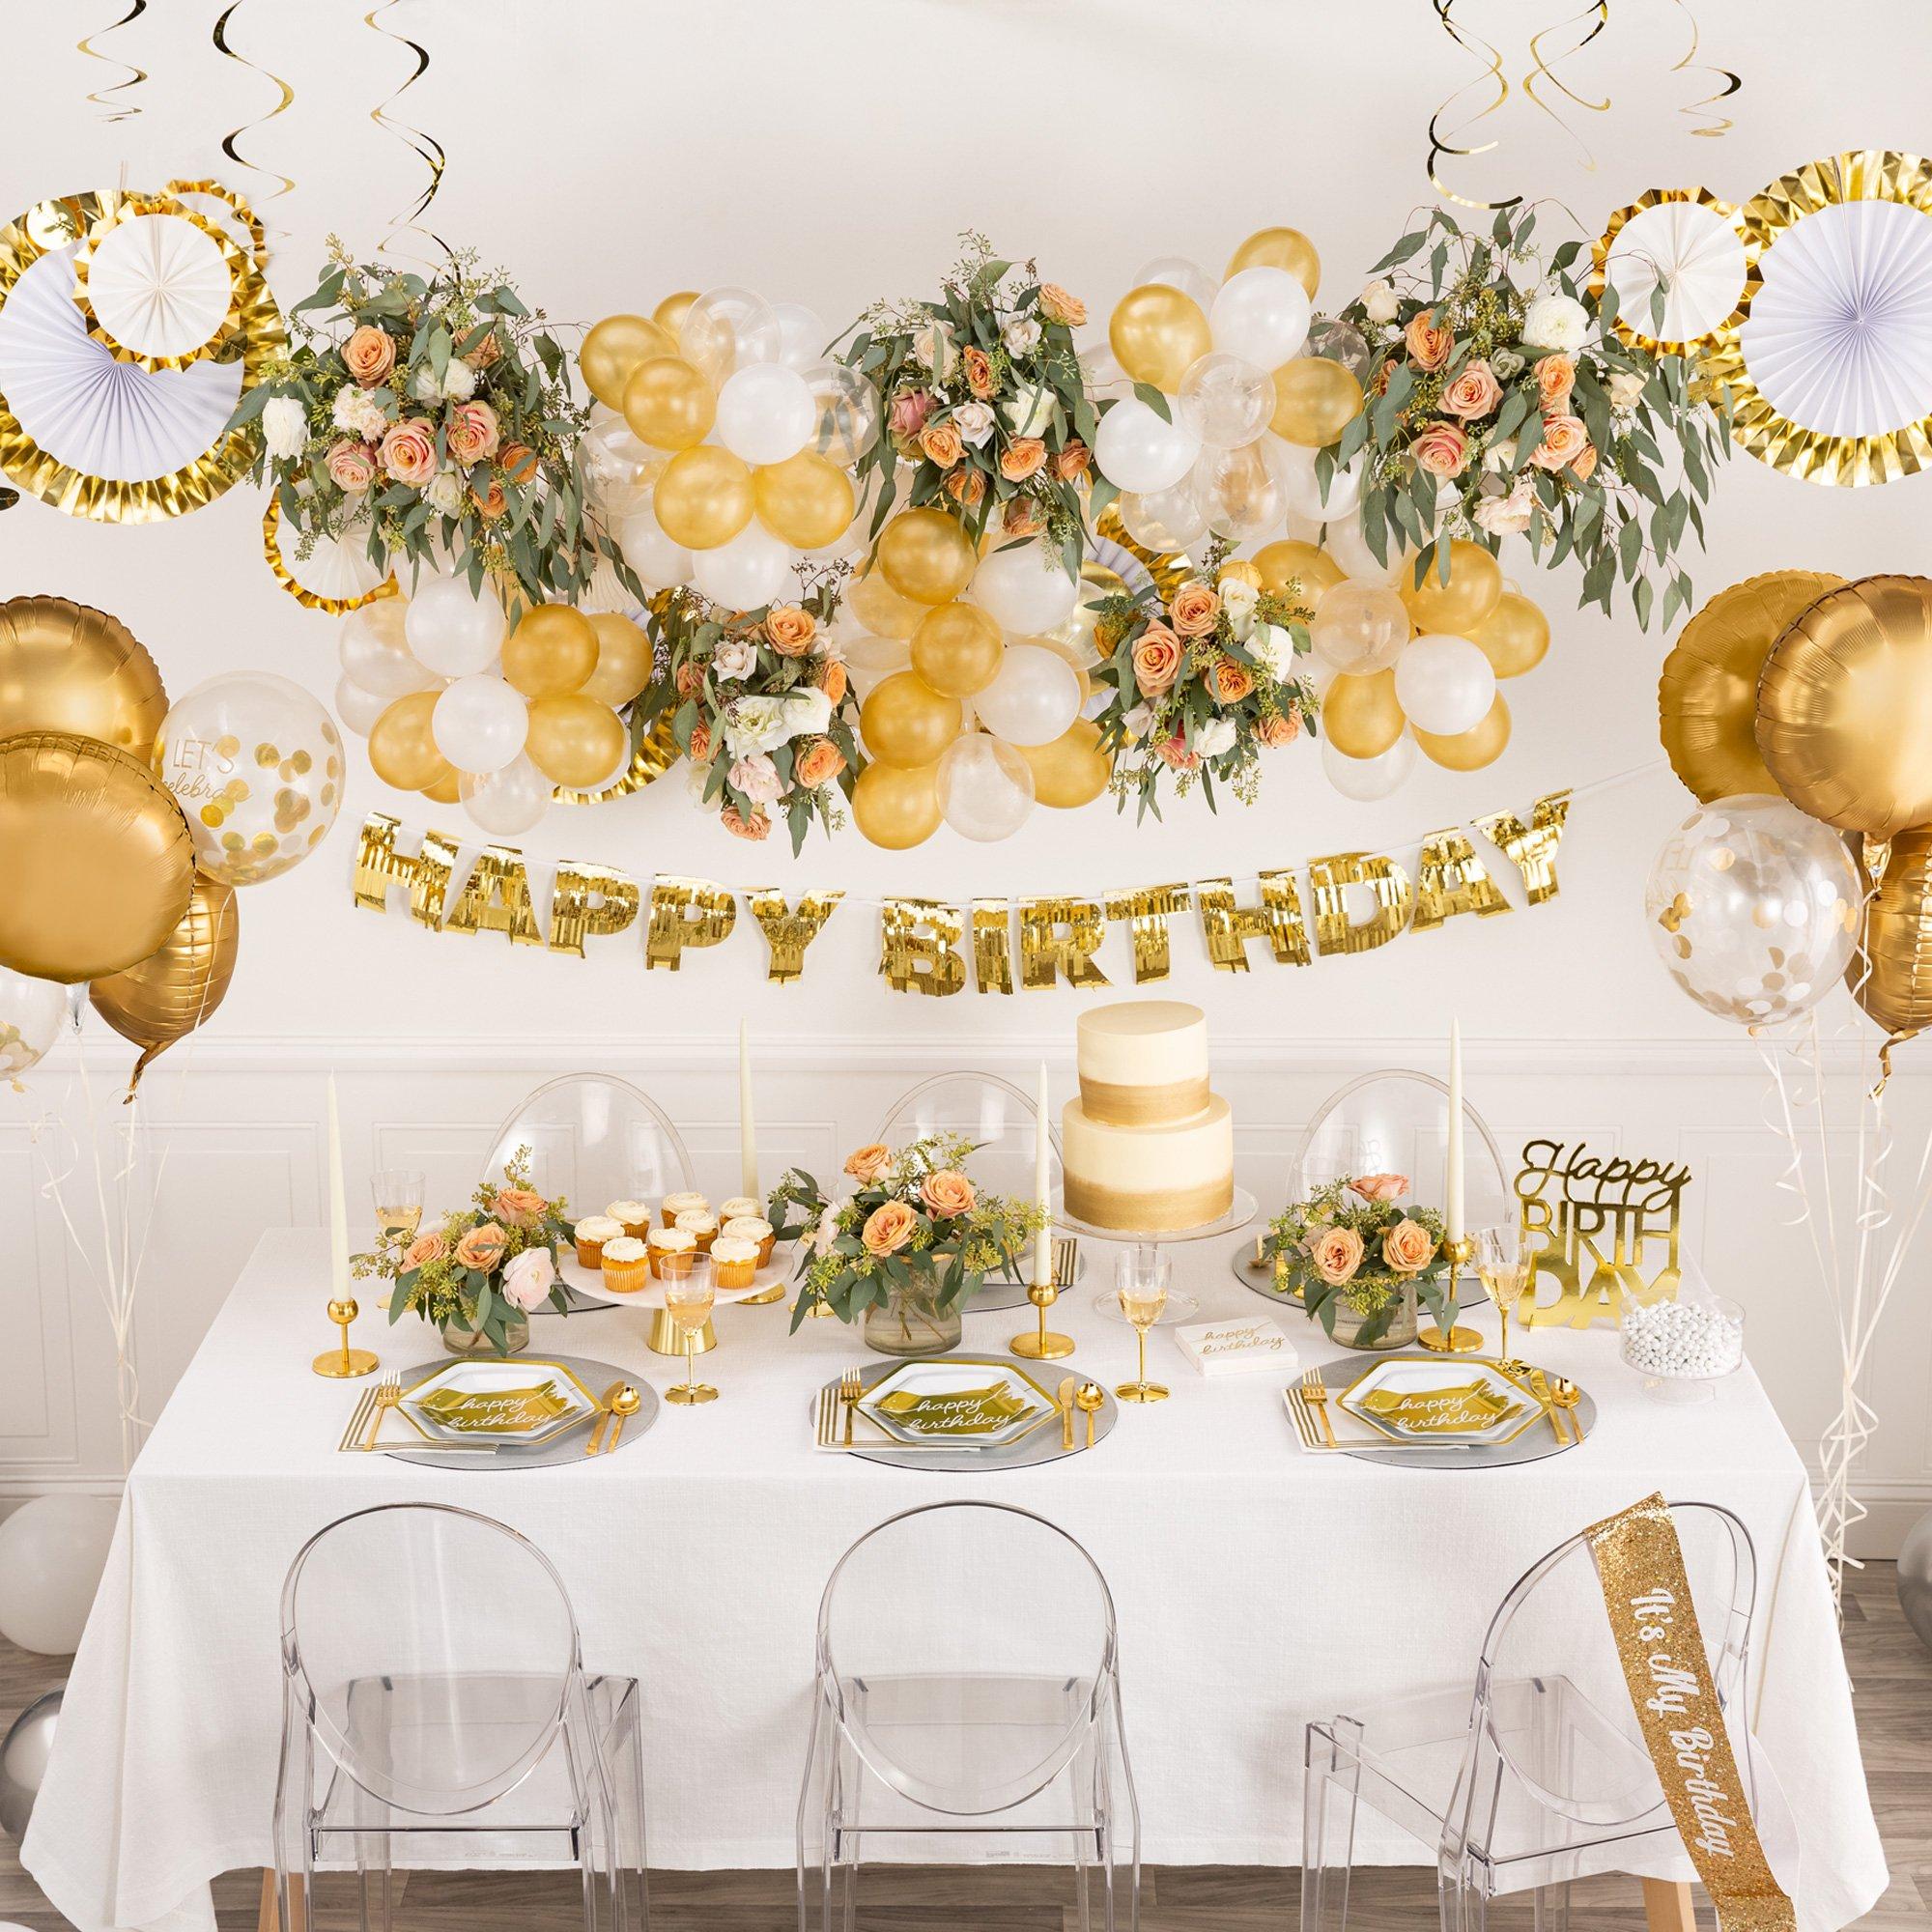 21st Birthday Party Supplies, Decorations & Ideas